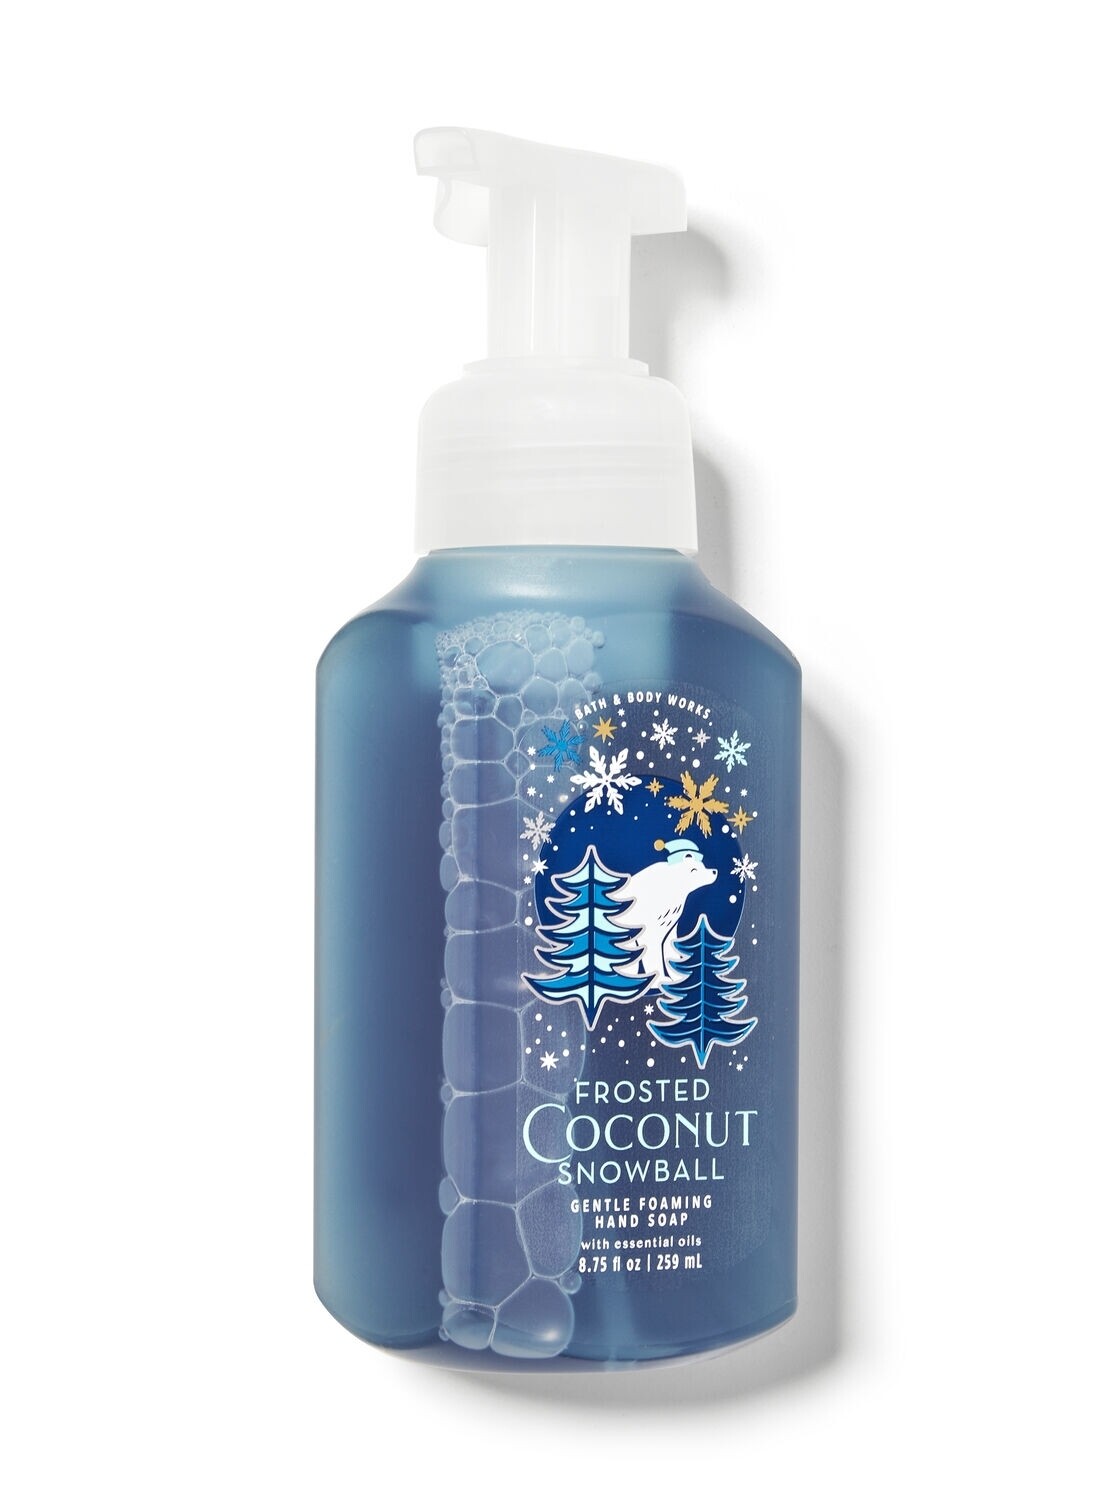 FROSTED COCONUT SNOWBALL-Gentle Foaming Hand Soap